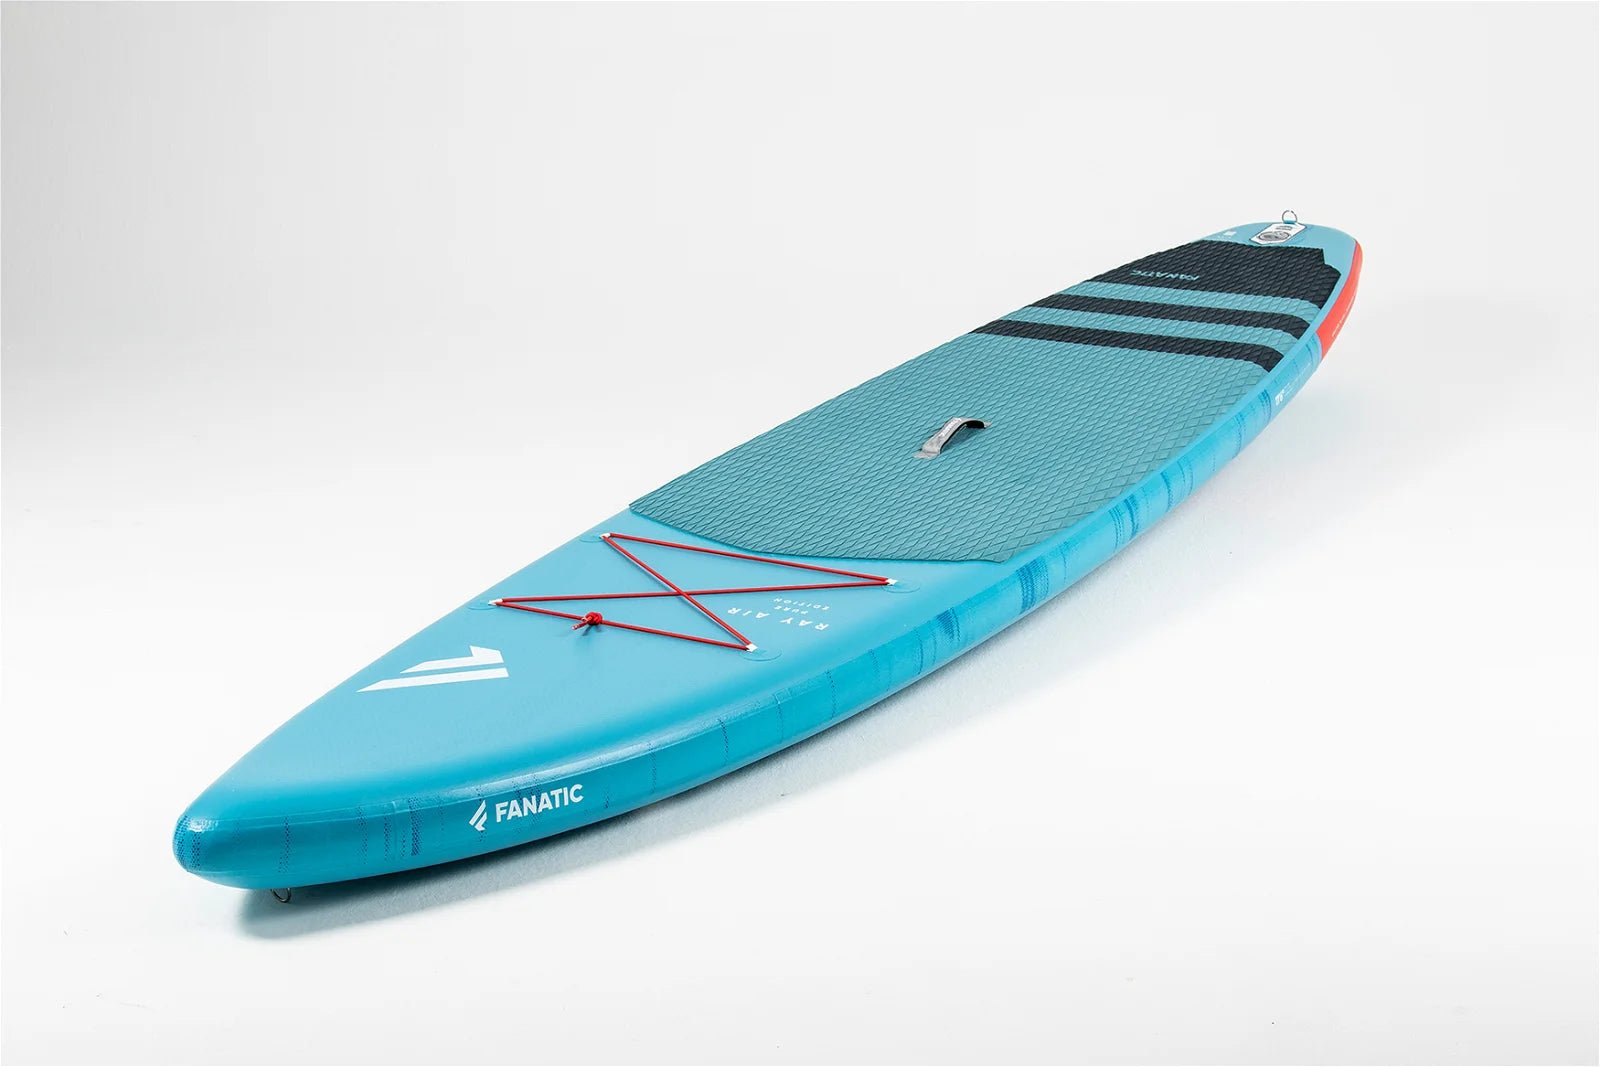 Fanatic Package Ray Air/Pure 2022 iSUP Paddleboard - Worthing Watersports - 9008415938407 - iSUP Packages - Fanatic SUP